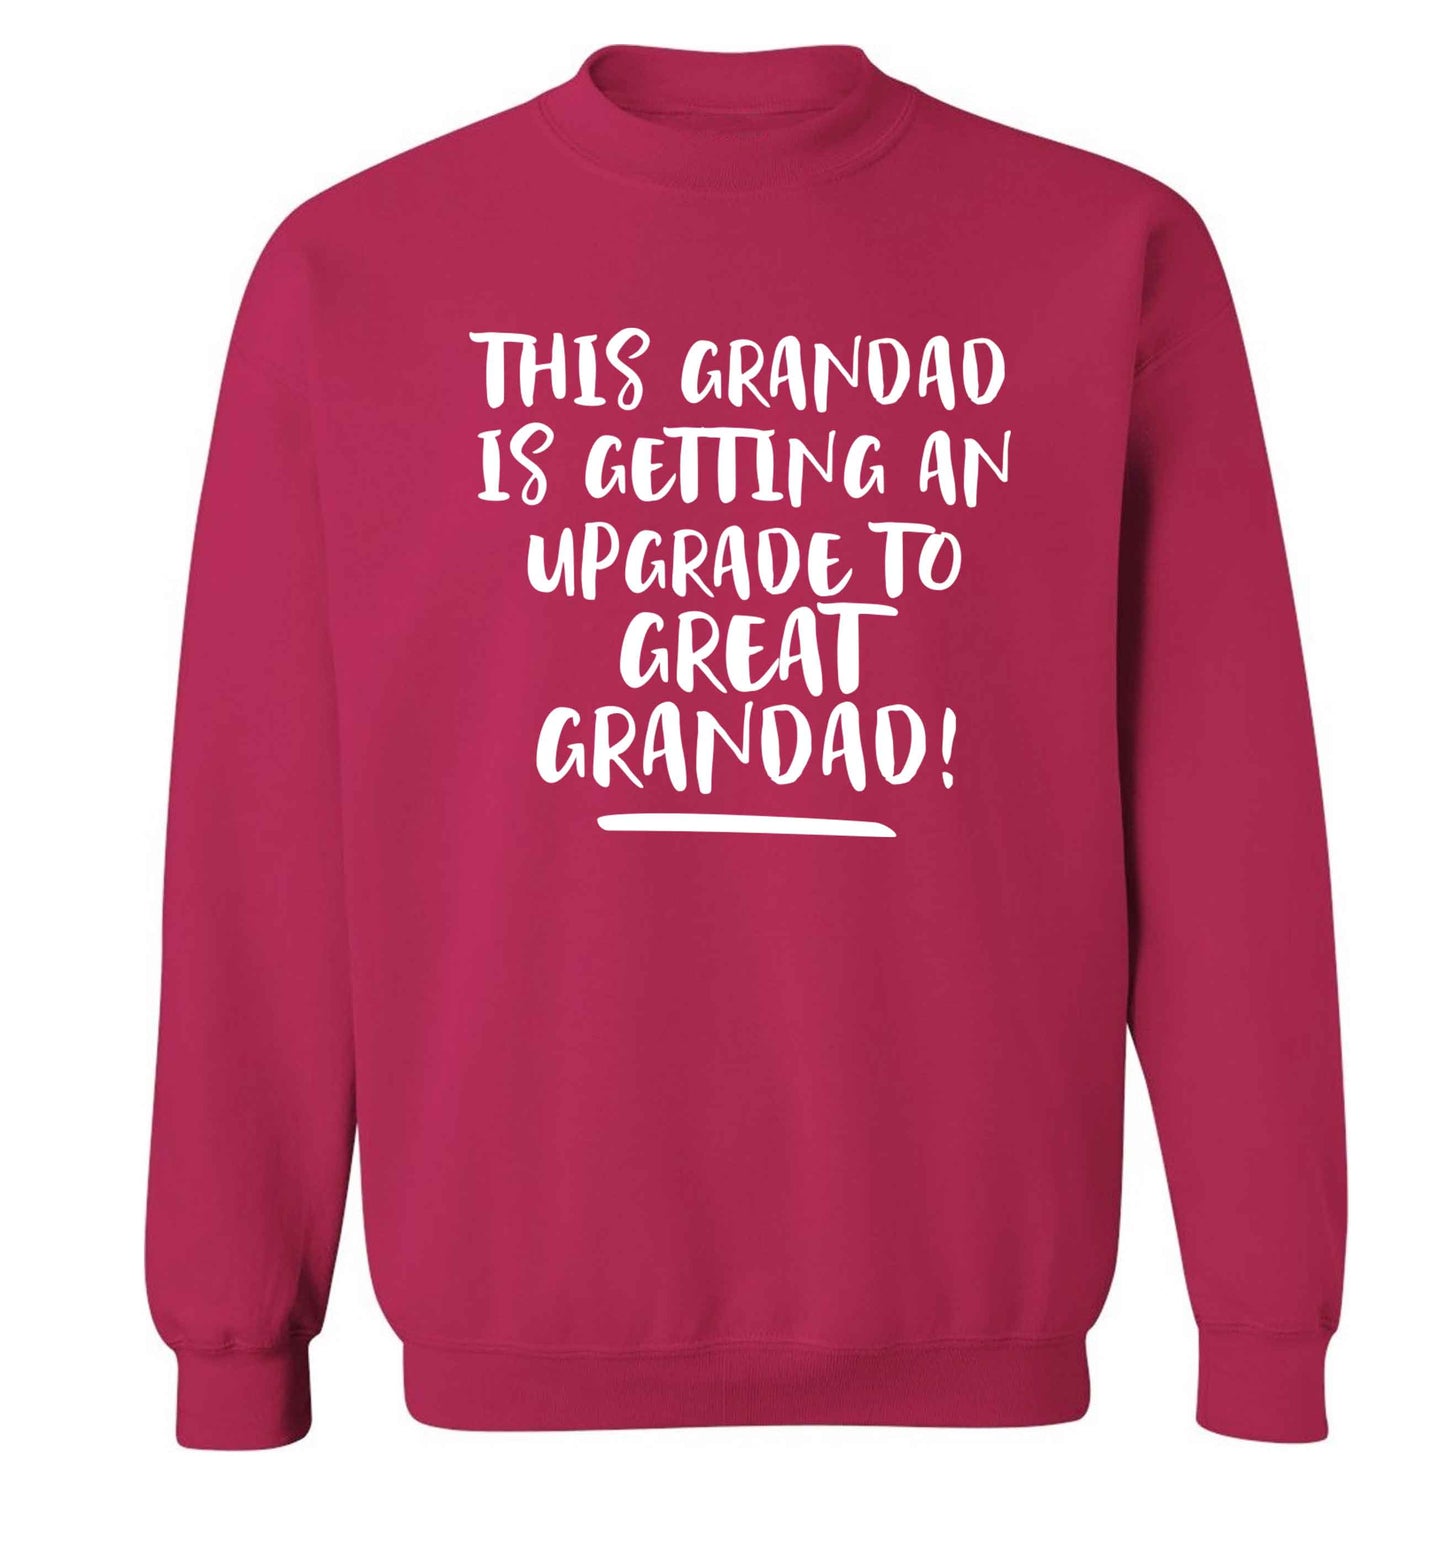 This grandad is getting an upgrade to great grandad! Adult's unisex pink Sweater 2XL